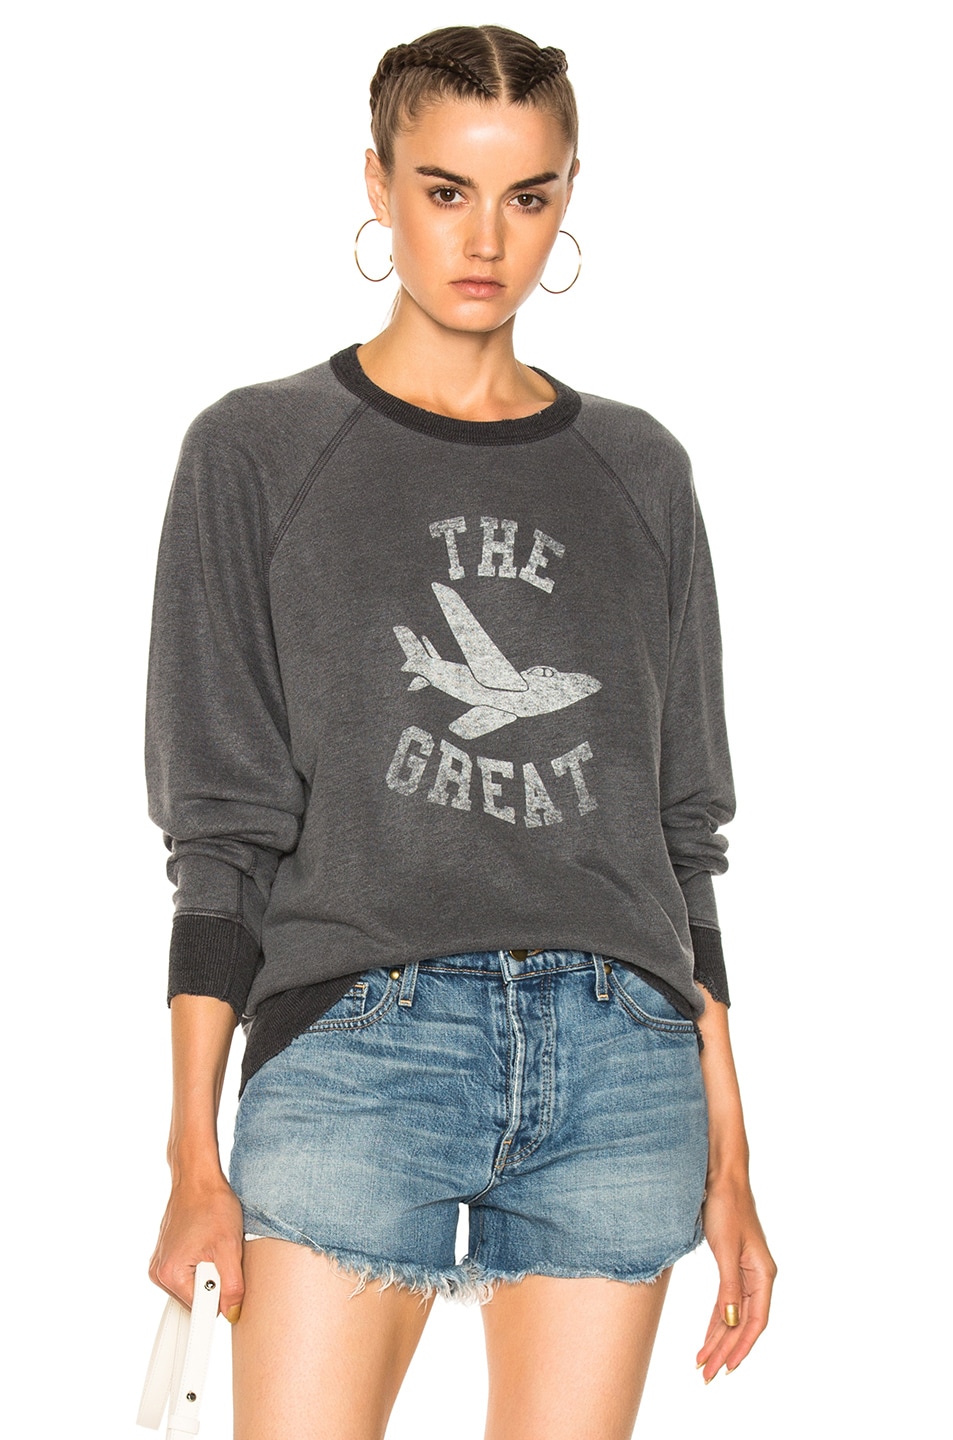 Image 1 of The Great College Sweatshirt in Charcoal Heather Grey